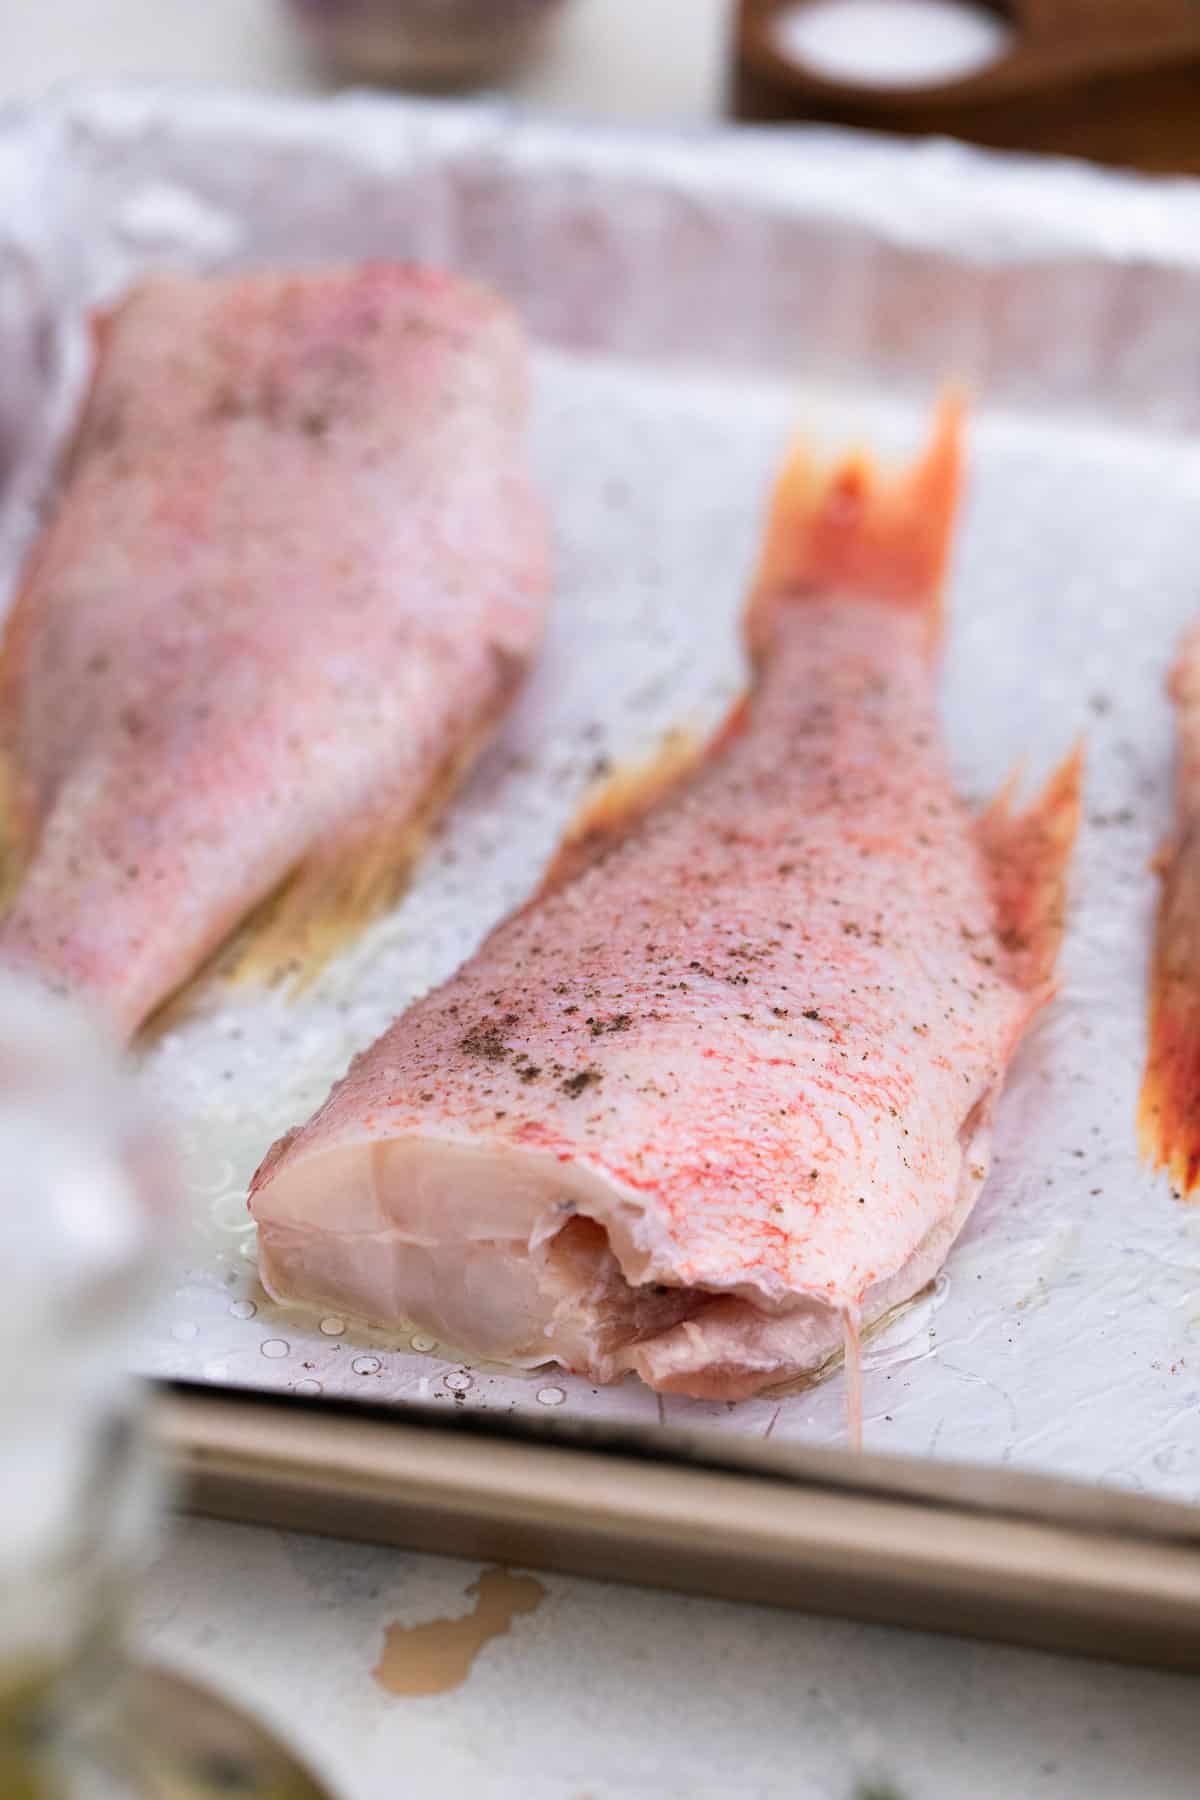 Some unbaked  fish on a baking sheet, seasoned with pepper.